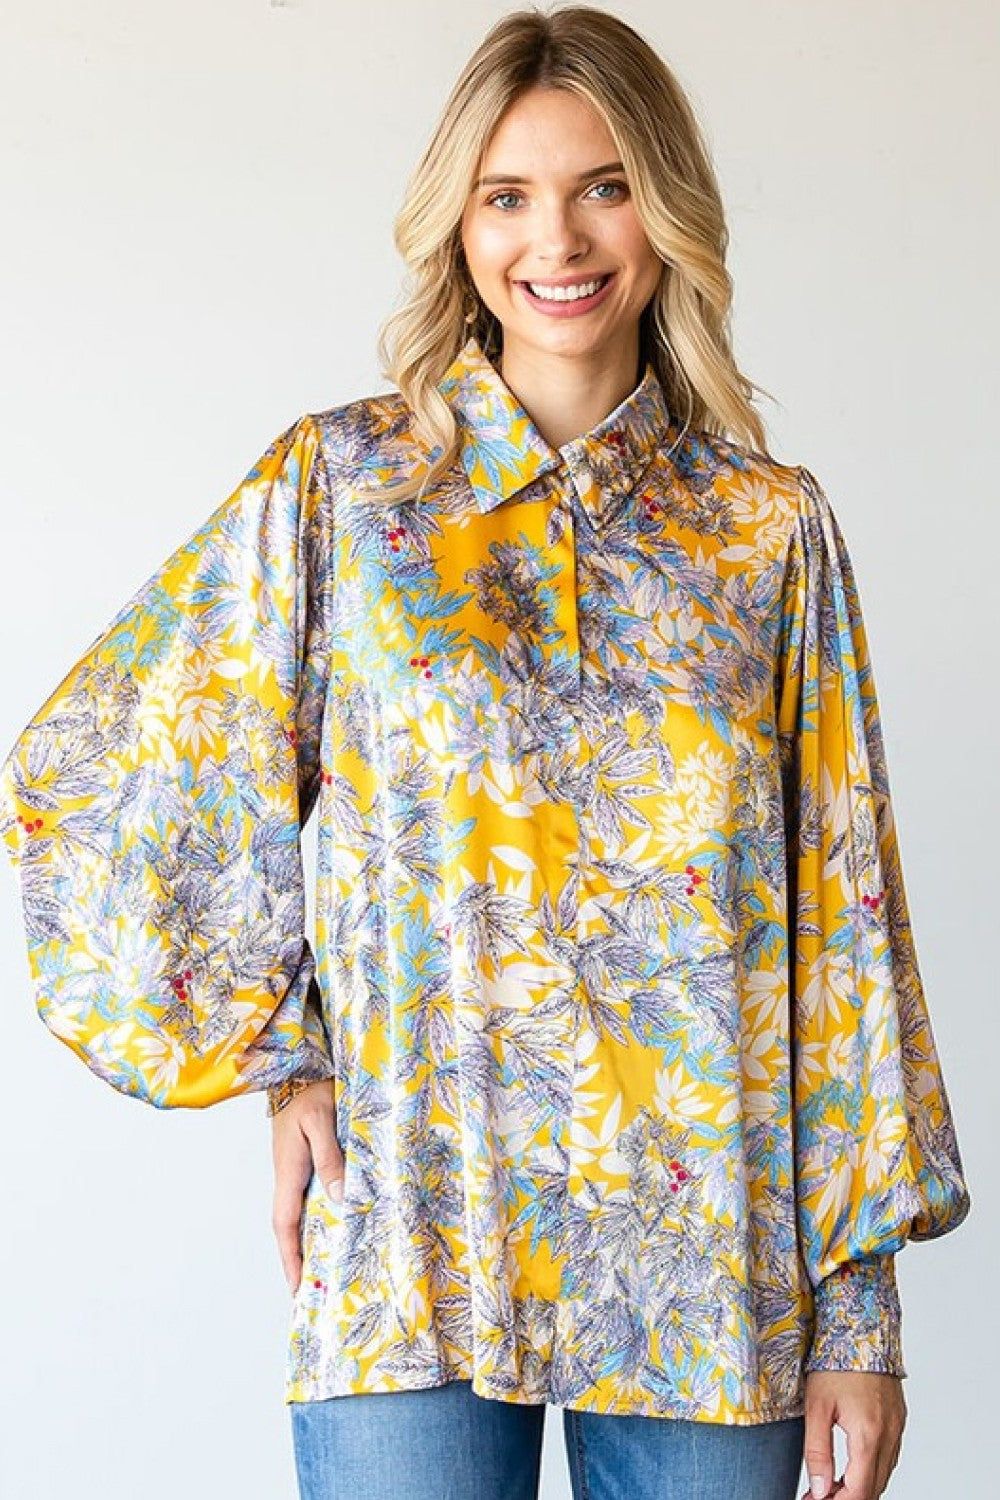 First Love Full Size Floral Lantern Sleeve Blouse.